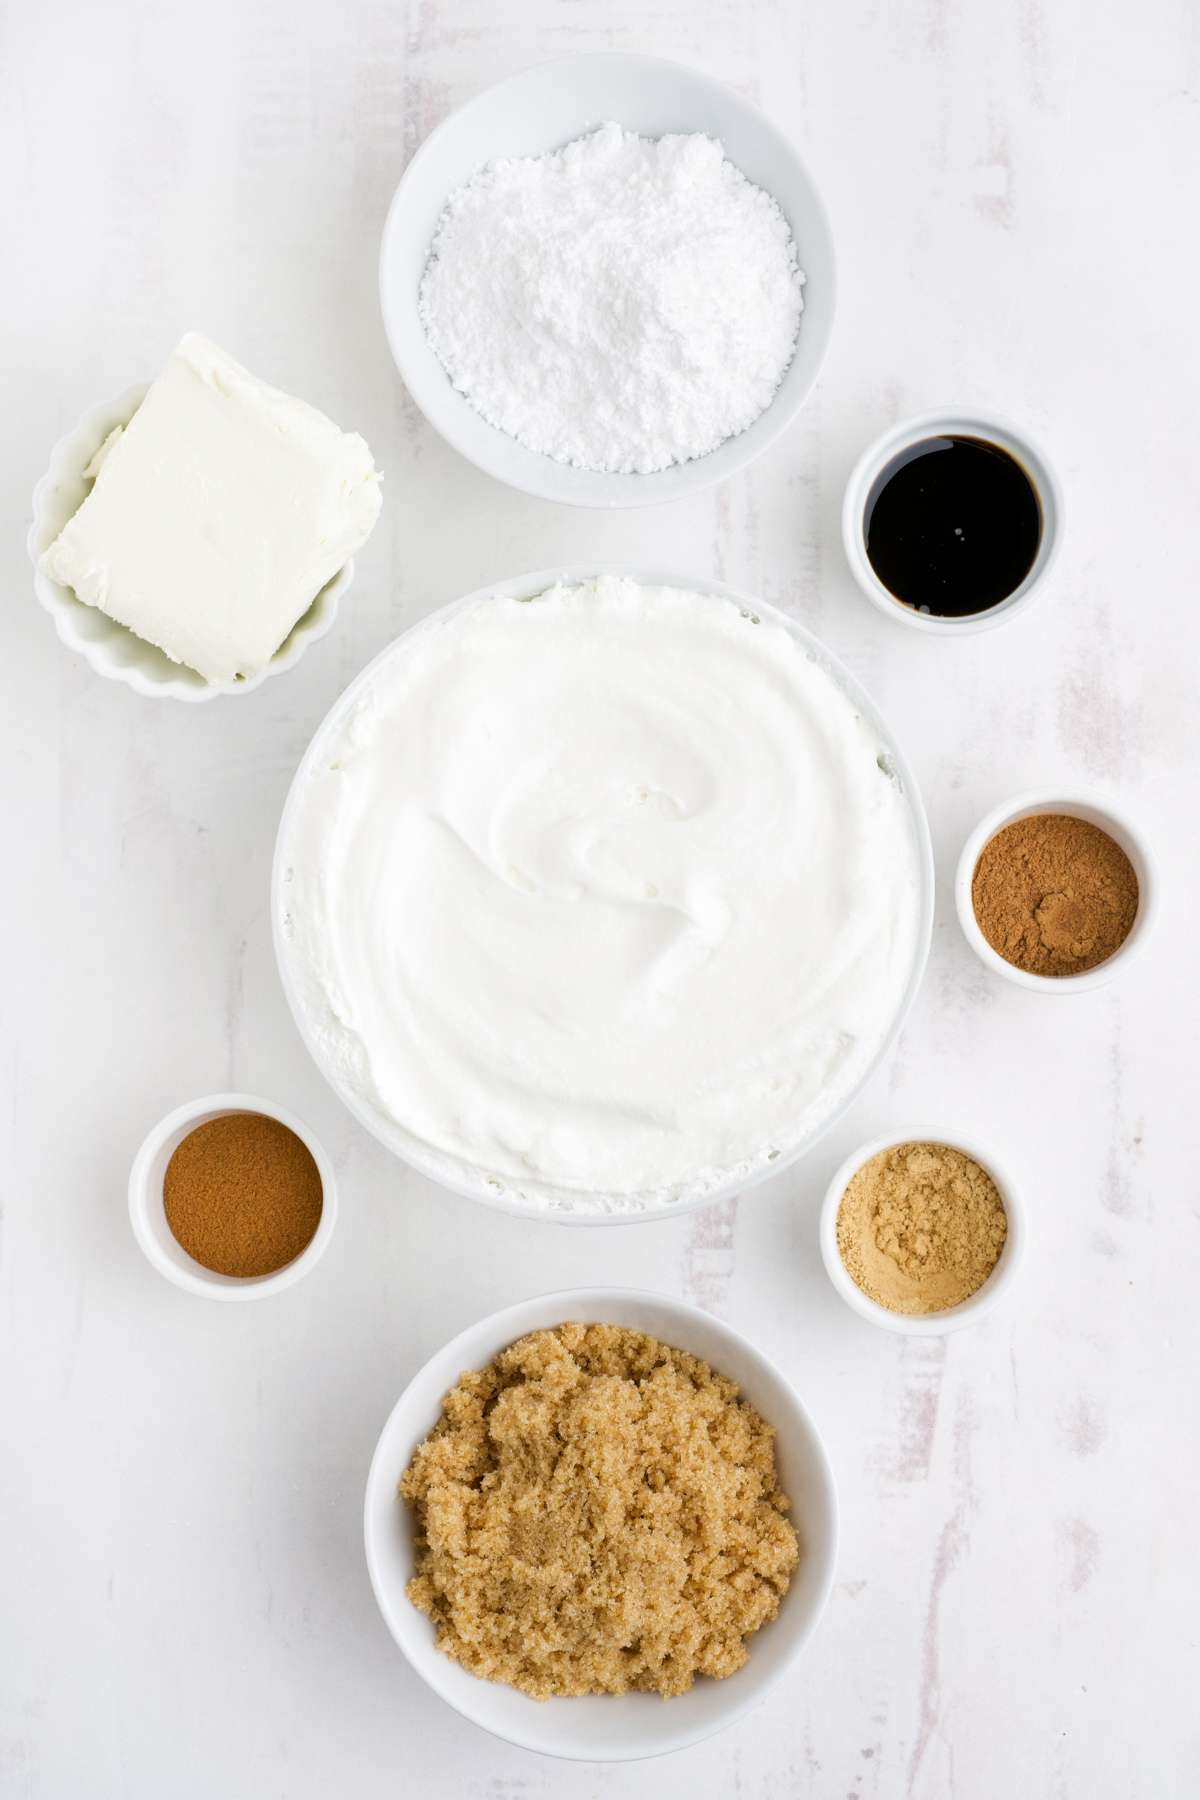 Ingredients to make gingerbread dip on the table before mixing together.